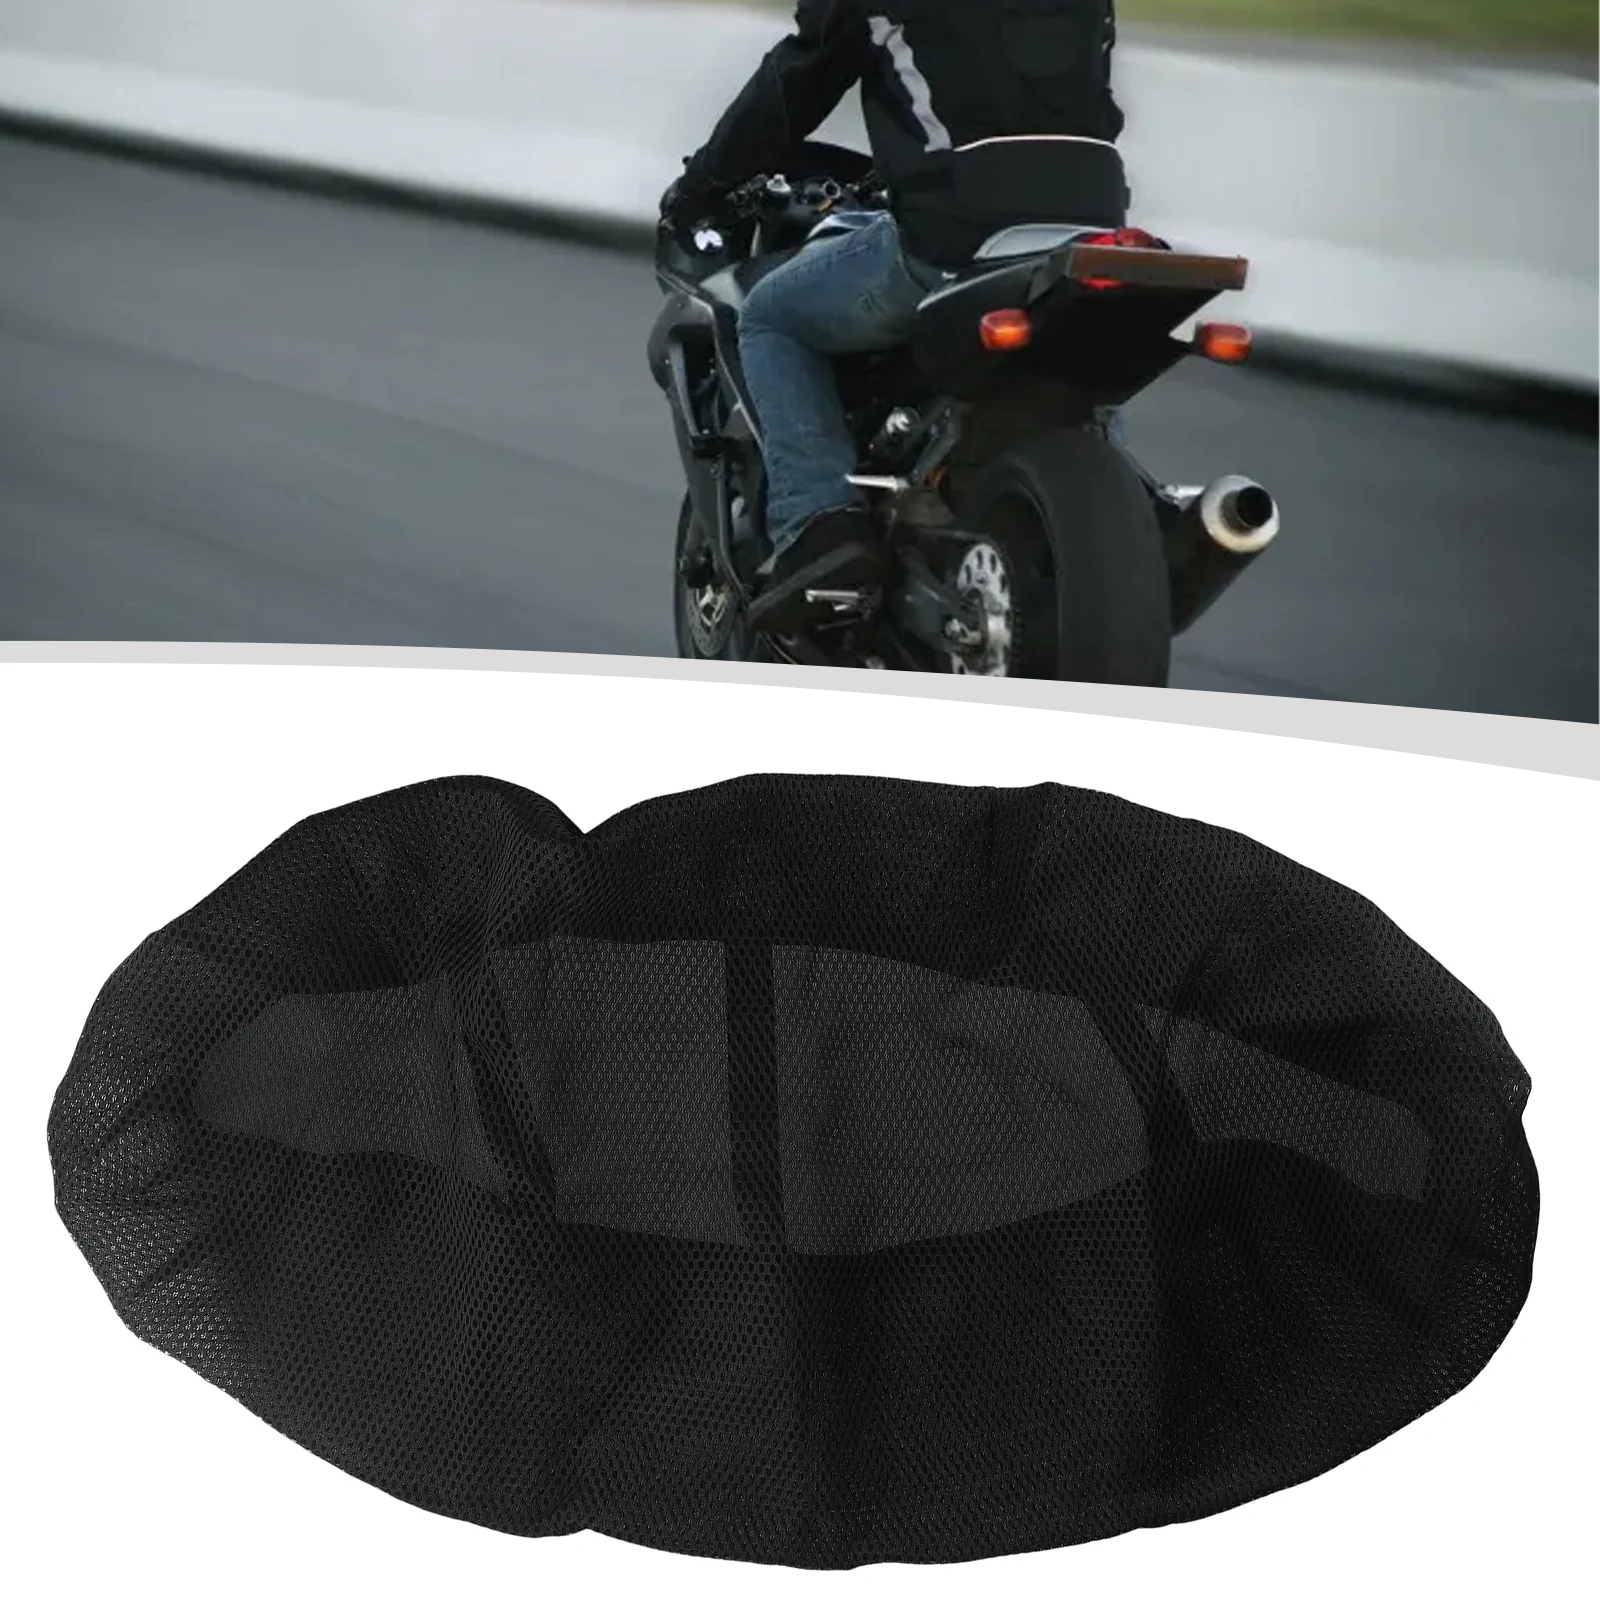 Motorcycle Cushion Seat Cover Motorcycle Mildew-proof Moisture-proof Motorcycle Pad 85*60CM Anti-Slip Brand New motorcycle cushion seat cover motorcycle mildew proof moisture proof motorcycle pad net 1pcs anti slip breathable